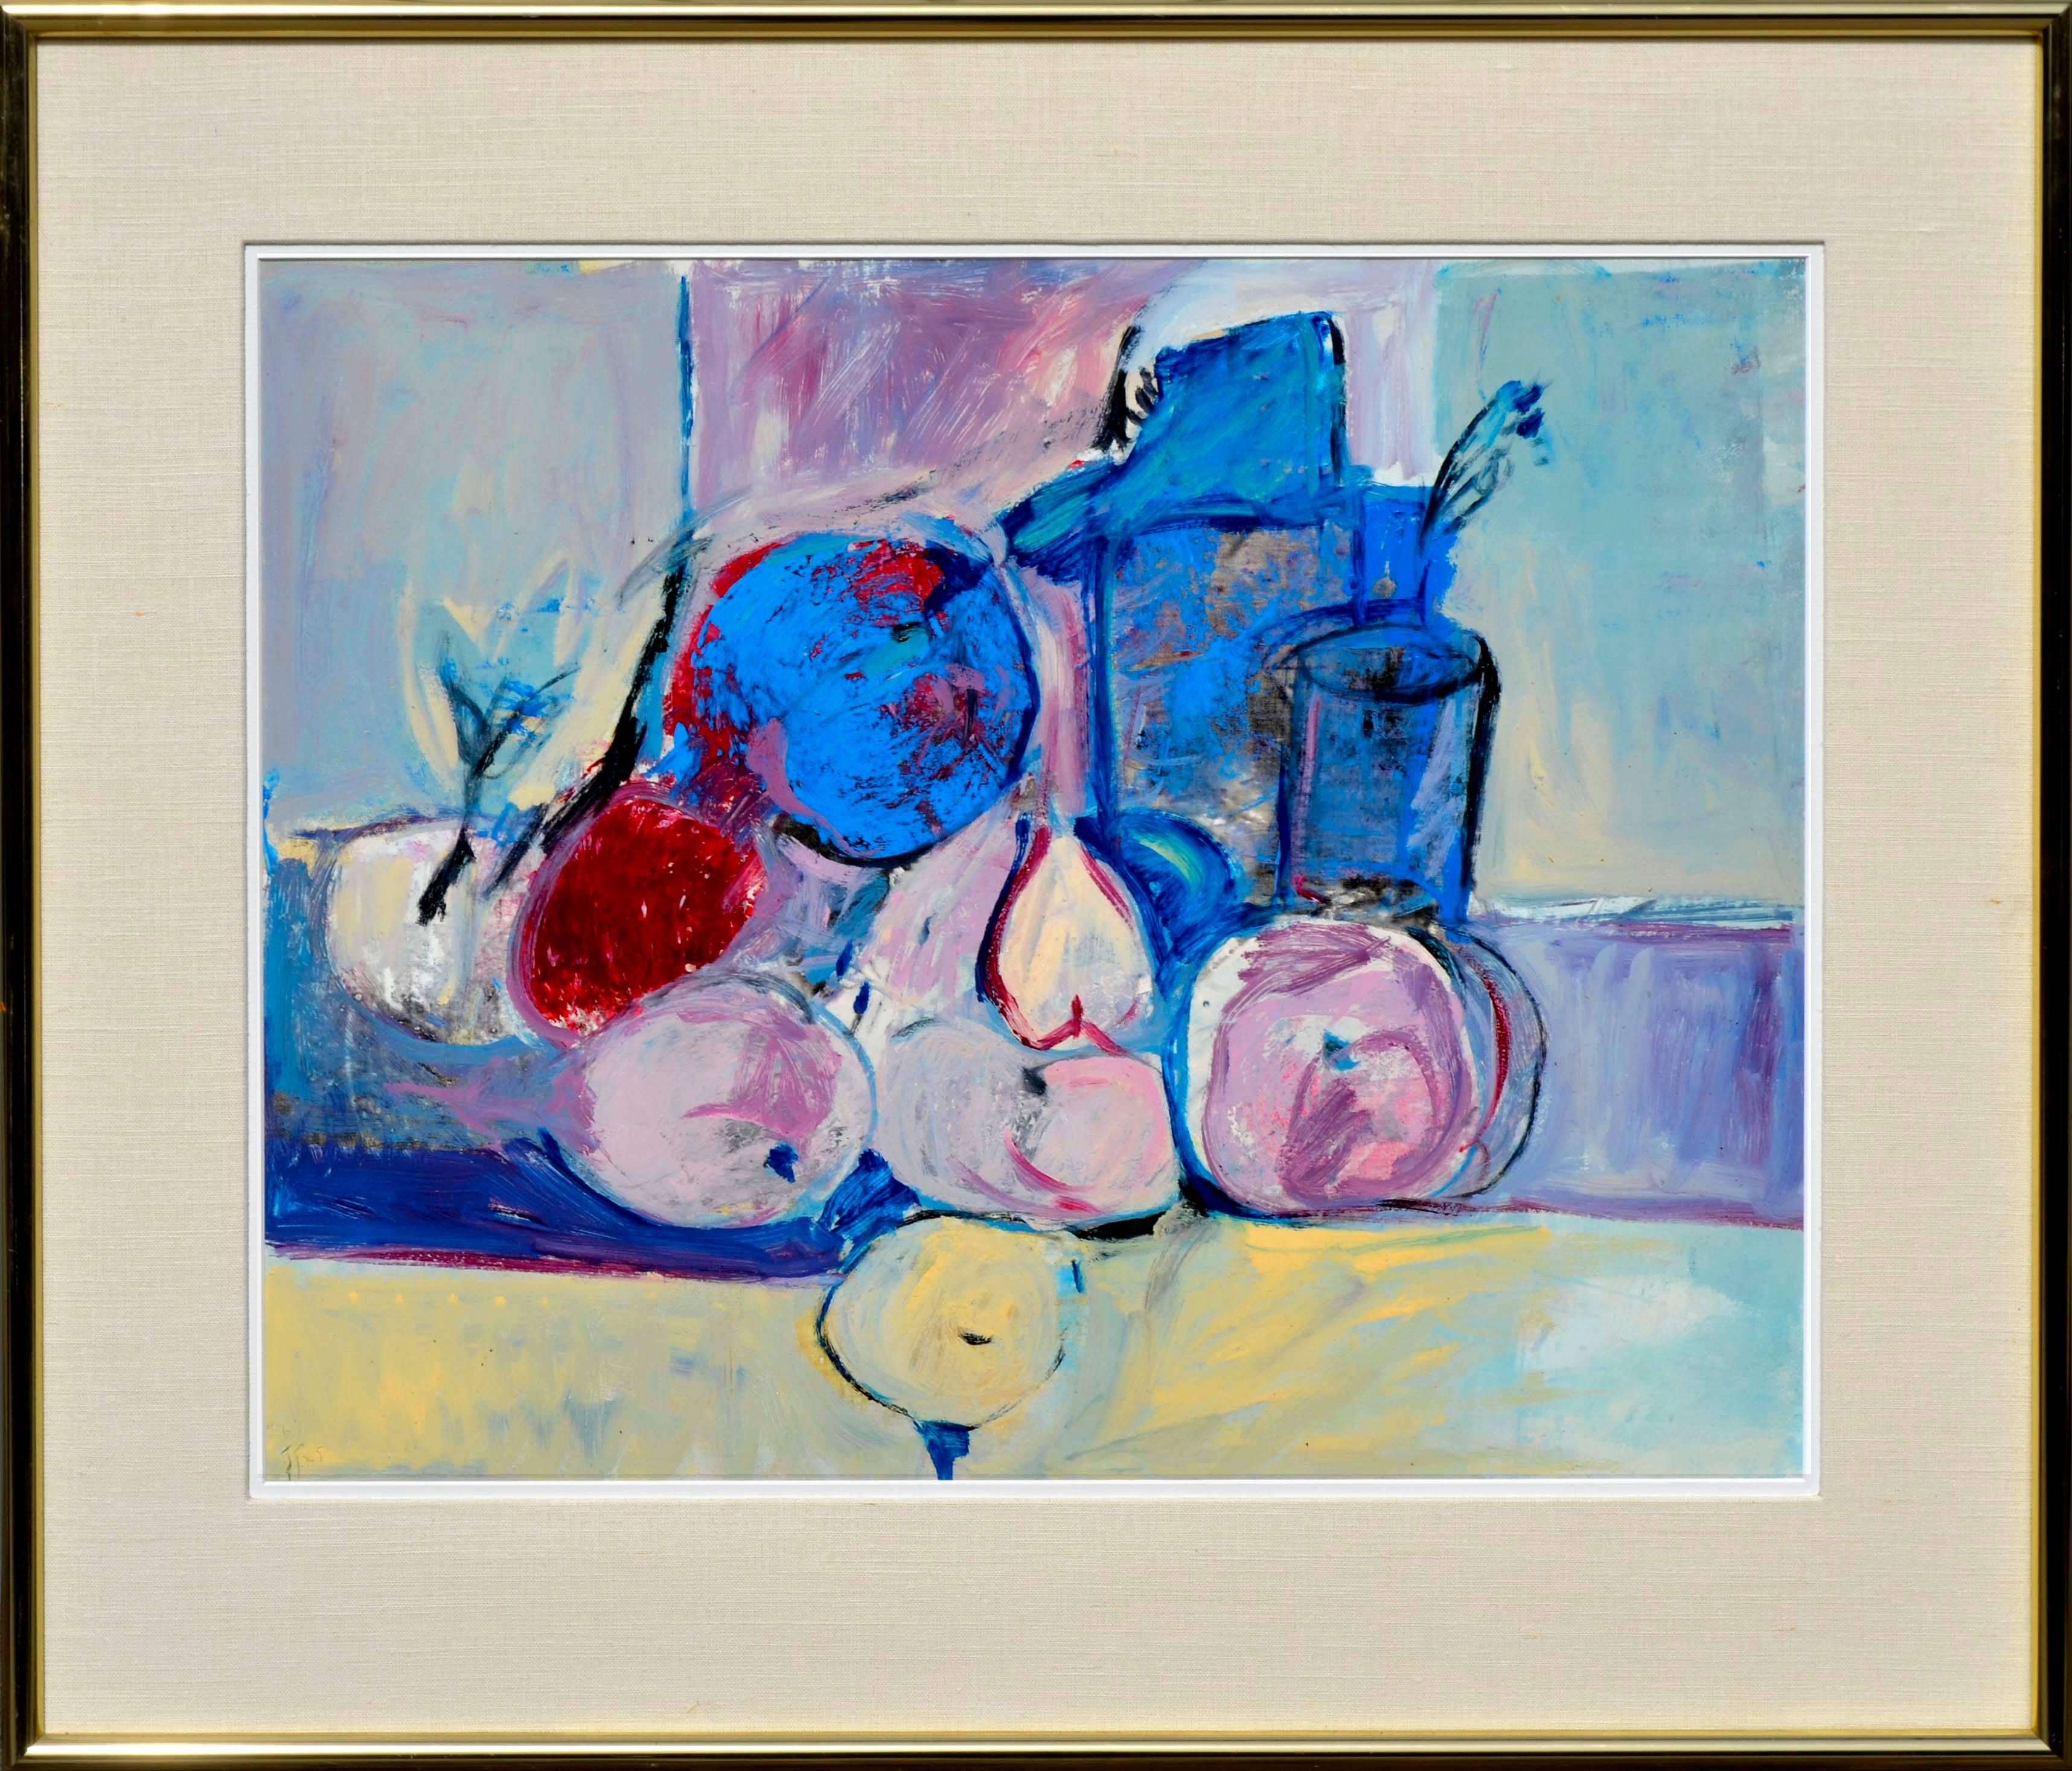 Abstract still life by Virginia Sevier Rogers (American, 1917-2015). Presented in a metal frame and acid free mat and linen over-mat. Signed with monogram; VSR '6 lower left. Framed: 26.5"H x 30"W. Image: 20"H x 23"W. 

Rogers studied with Hugh